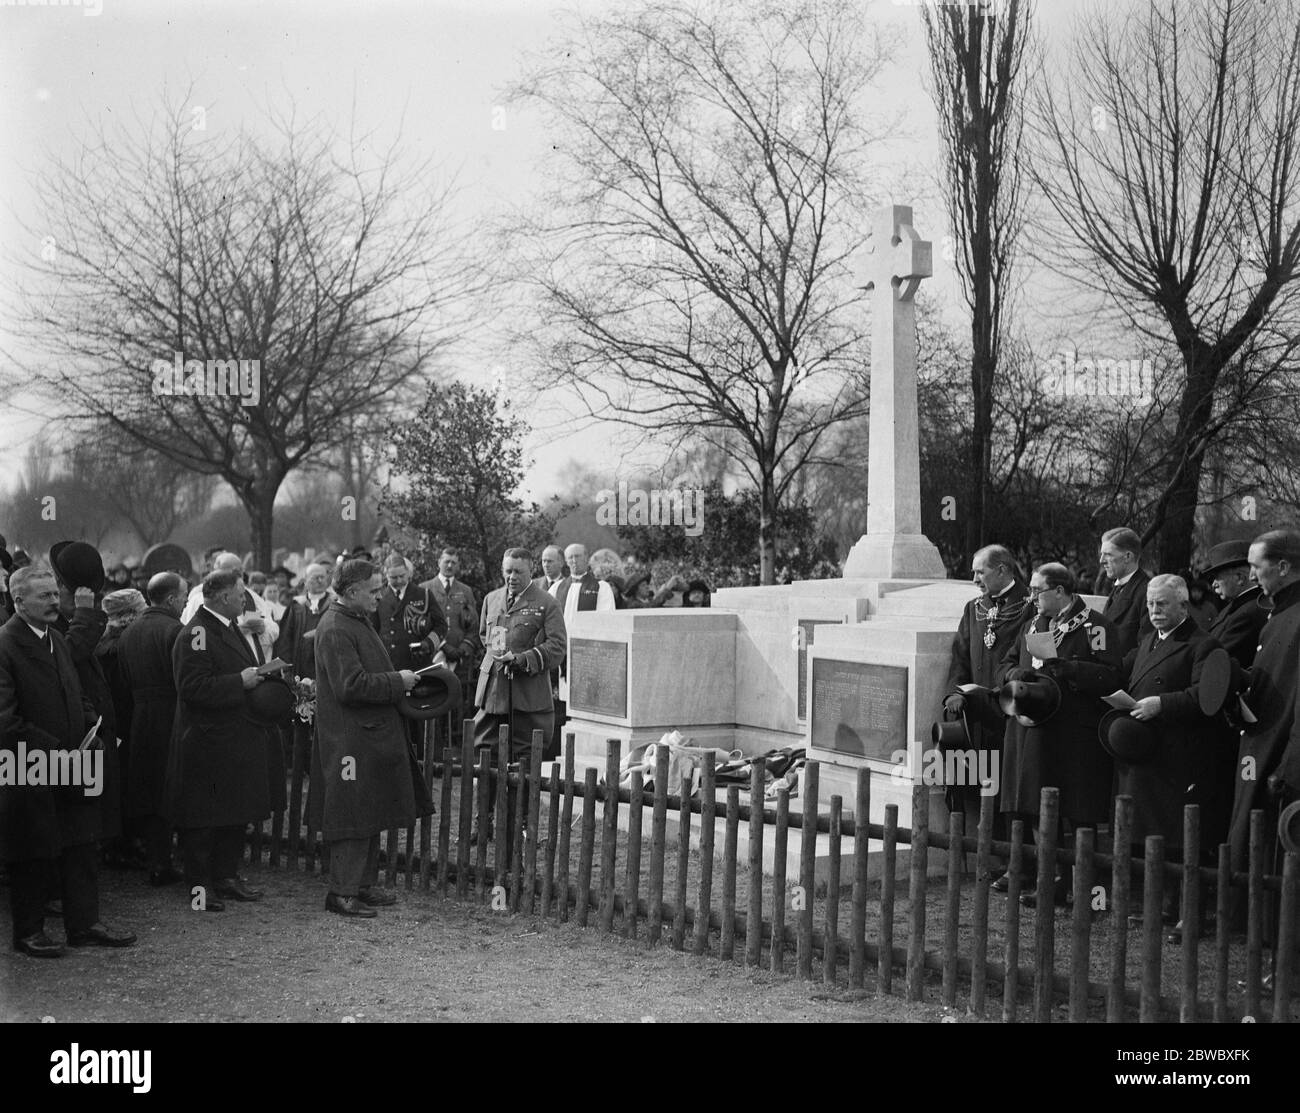 The R38 Memorial unveiled in hull Western Cemetery . Vice Air Marshal Sir A V Vyvyan , who unveiled the memorial , speaking after the ceremony . By his side in Naval uniform is seen Capt Hussey , American Naval Air Attache , who represented the United States . 11 April 1924 Stock Photo